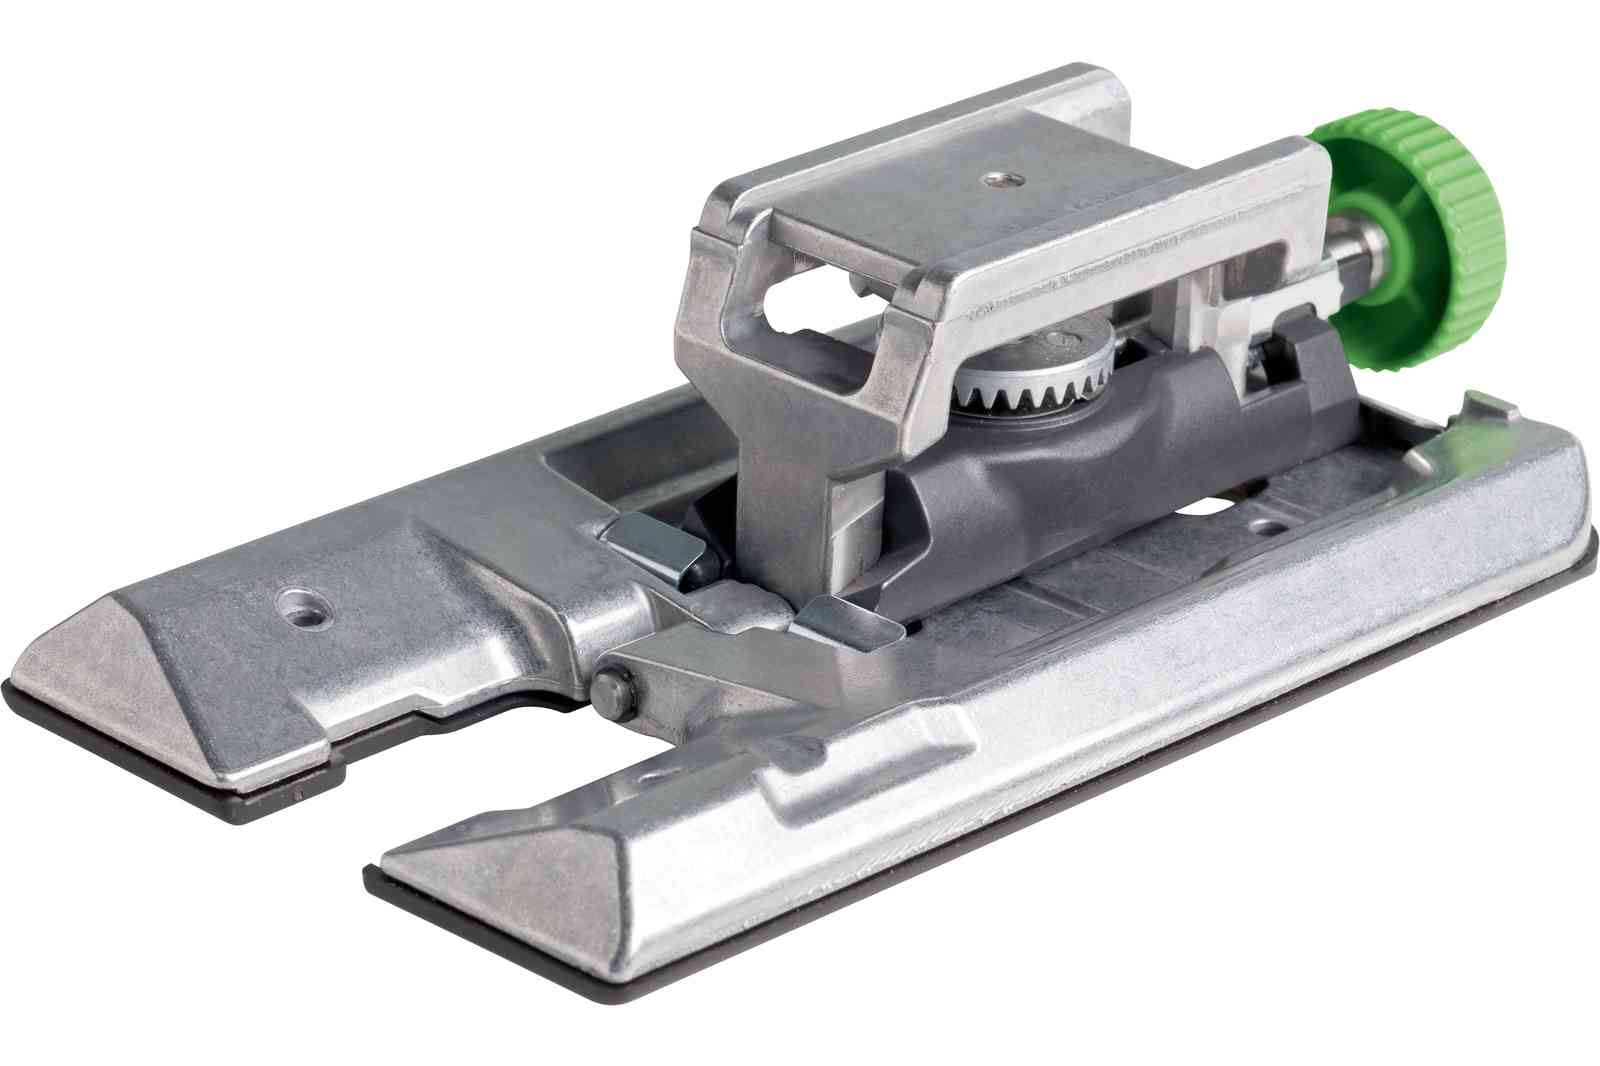 table-angulaire-wt-ps400-496134-festool-0